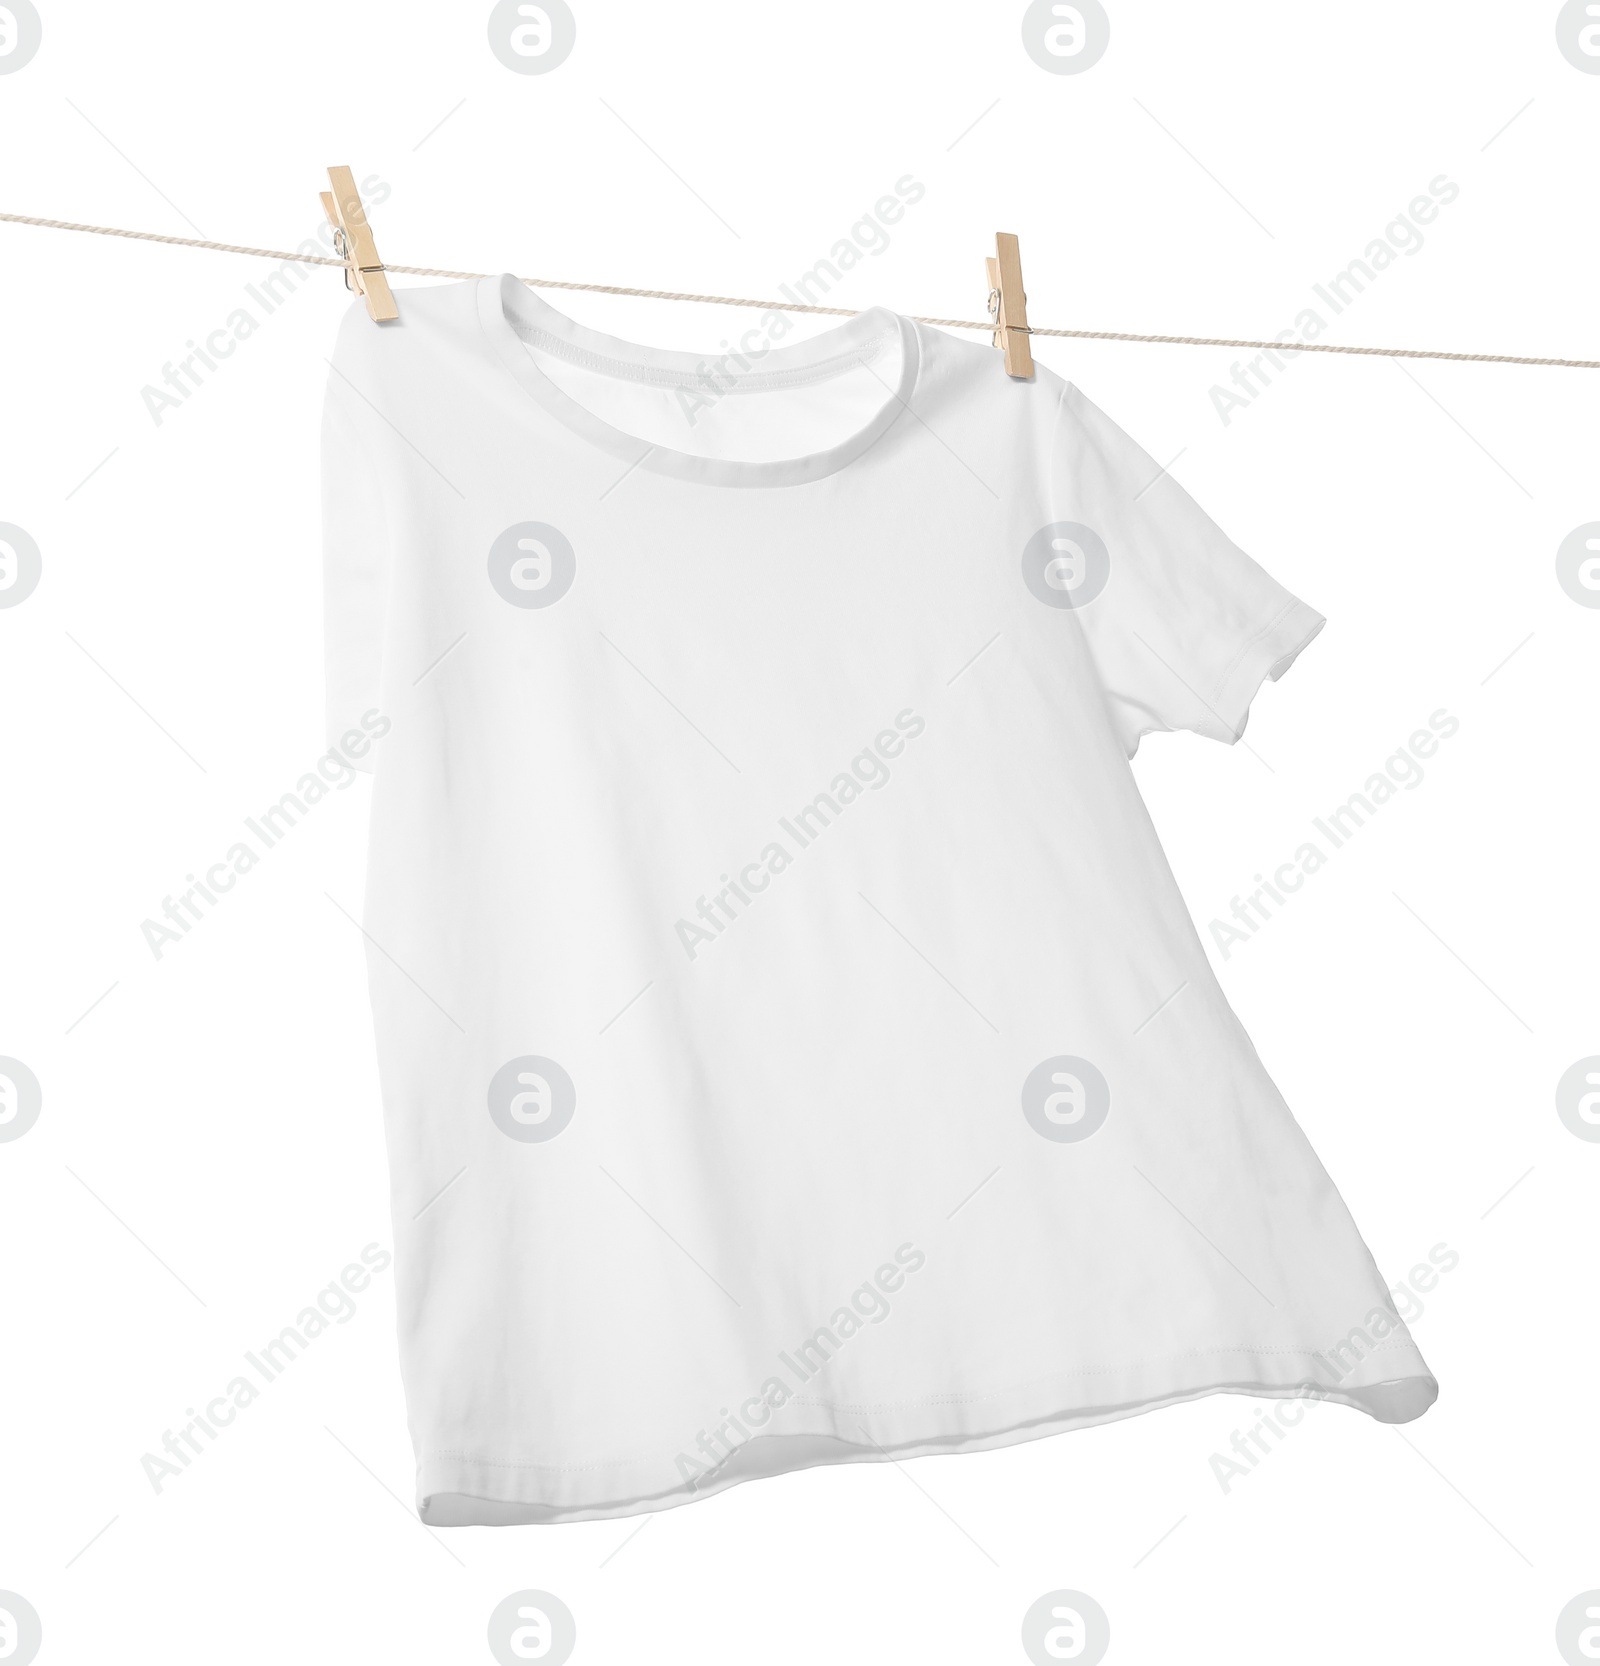 Photo of One t-shirt drying on washing line isolated on white, low angle view